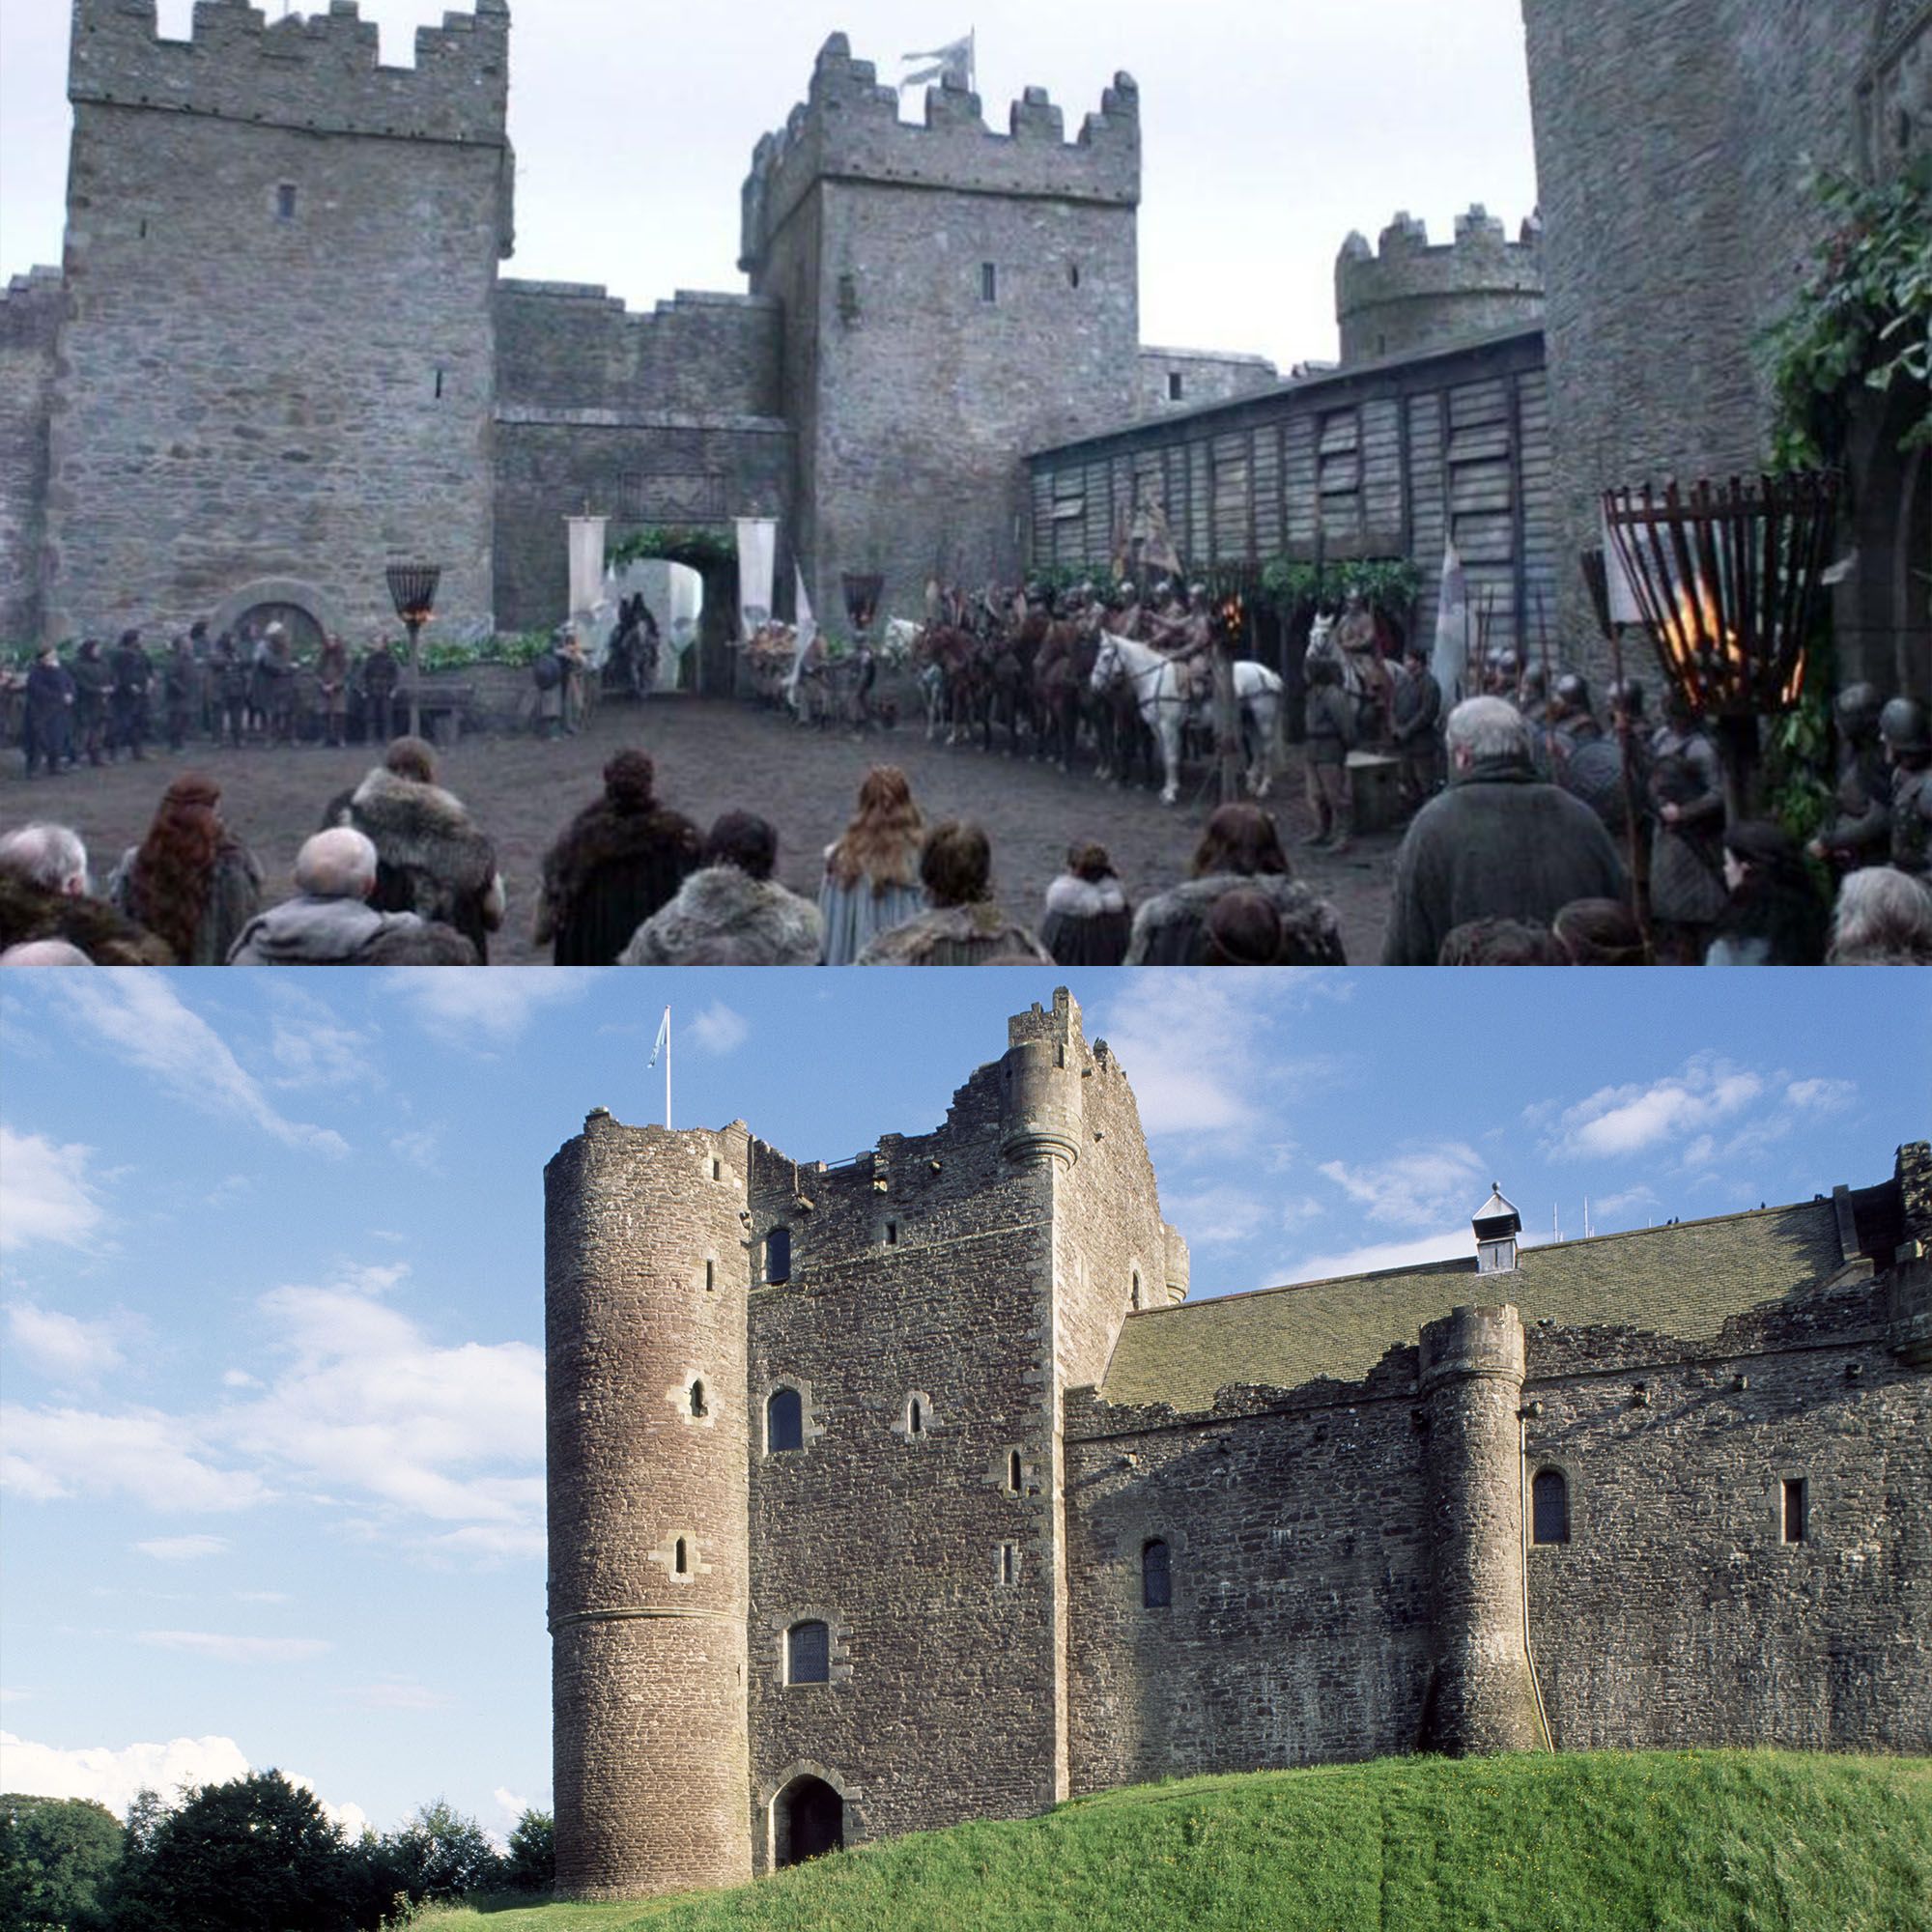 Game Of Thrones Filming Locations Game Of Thrones Shooting Locations